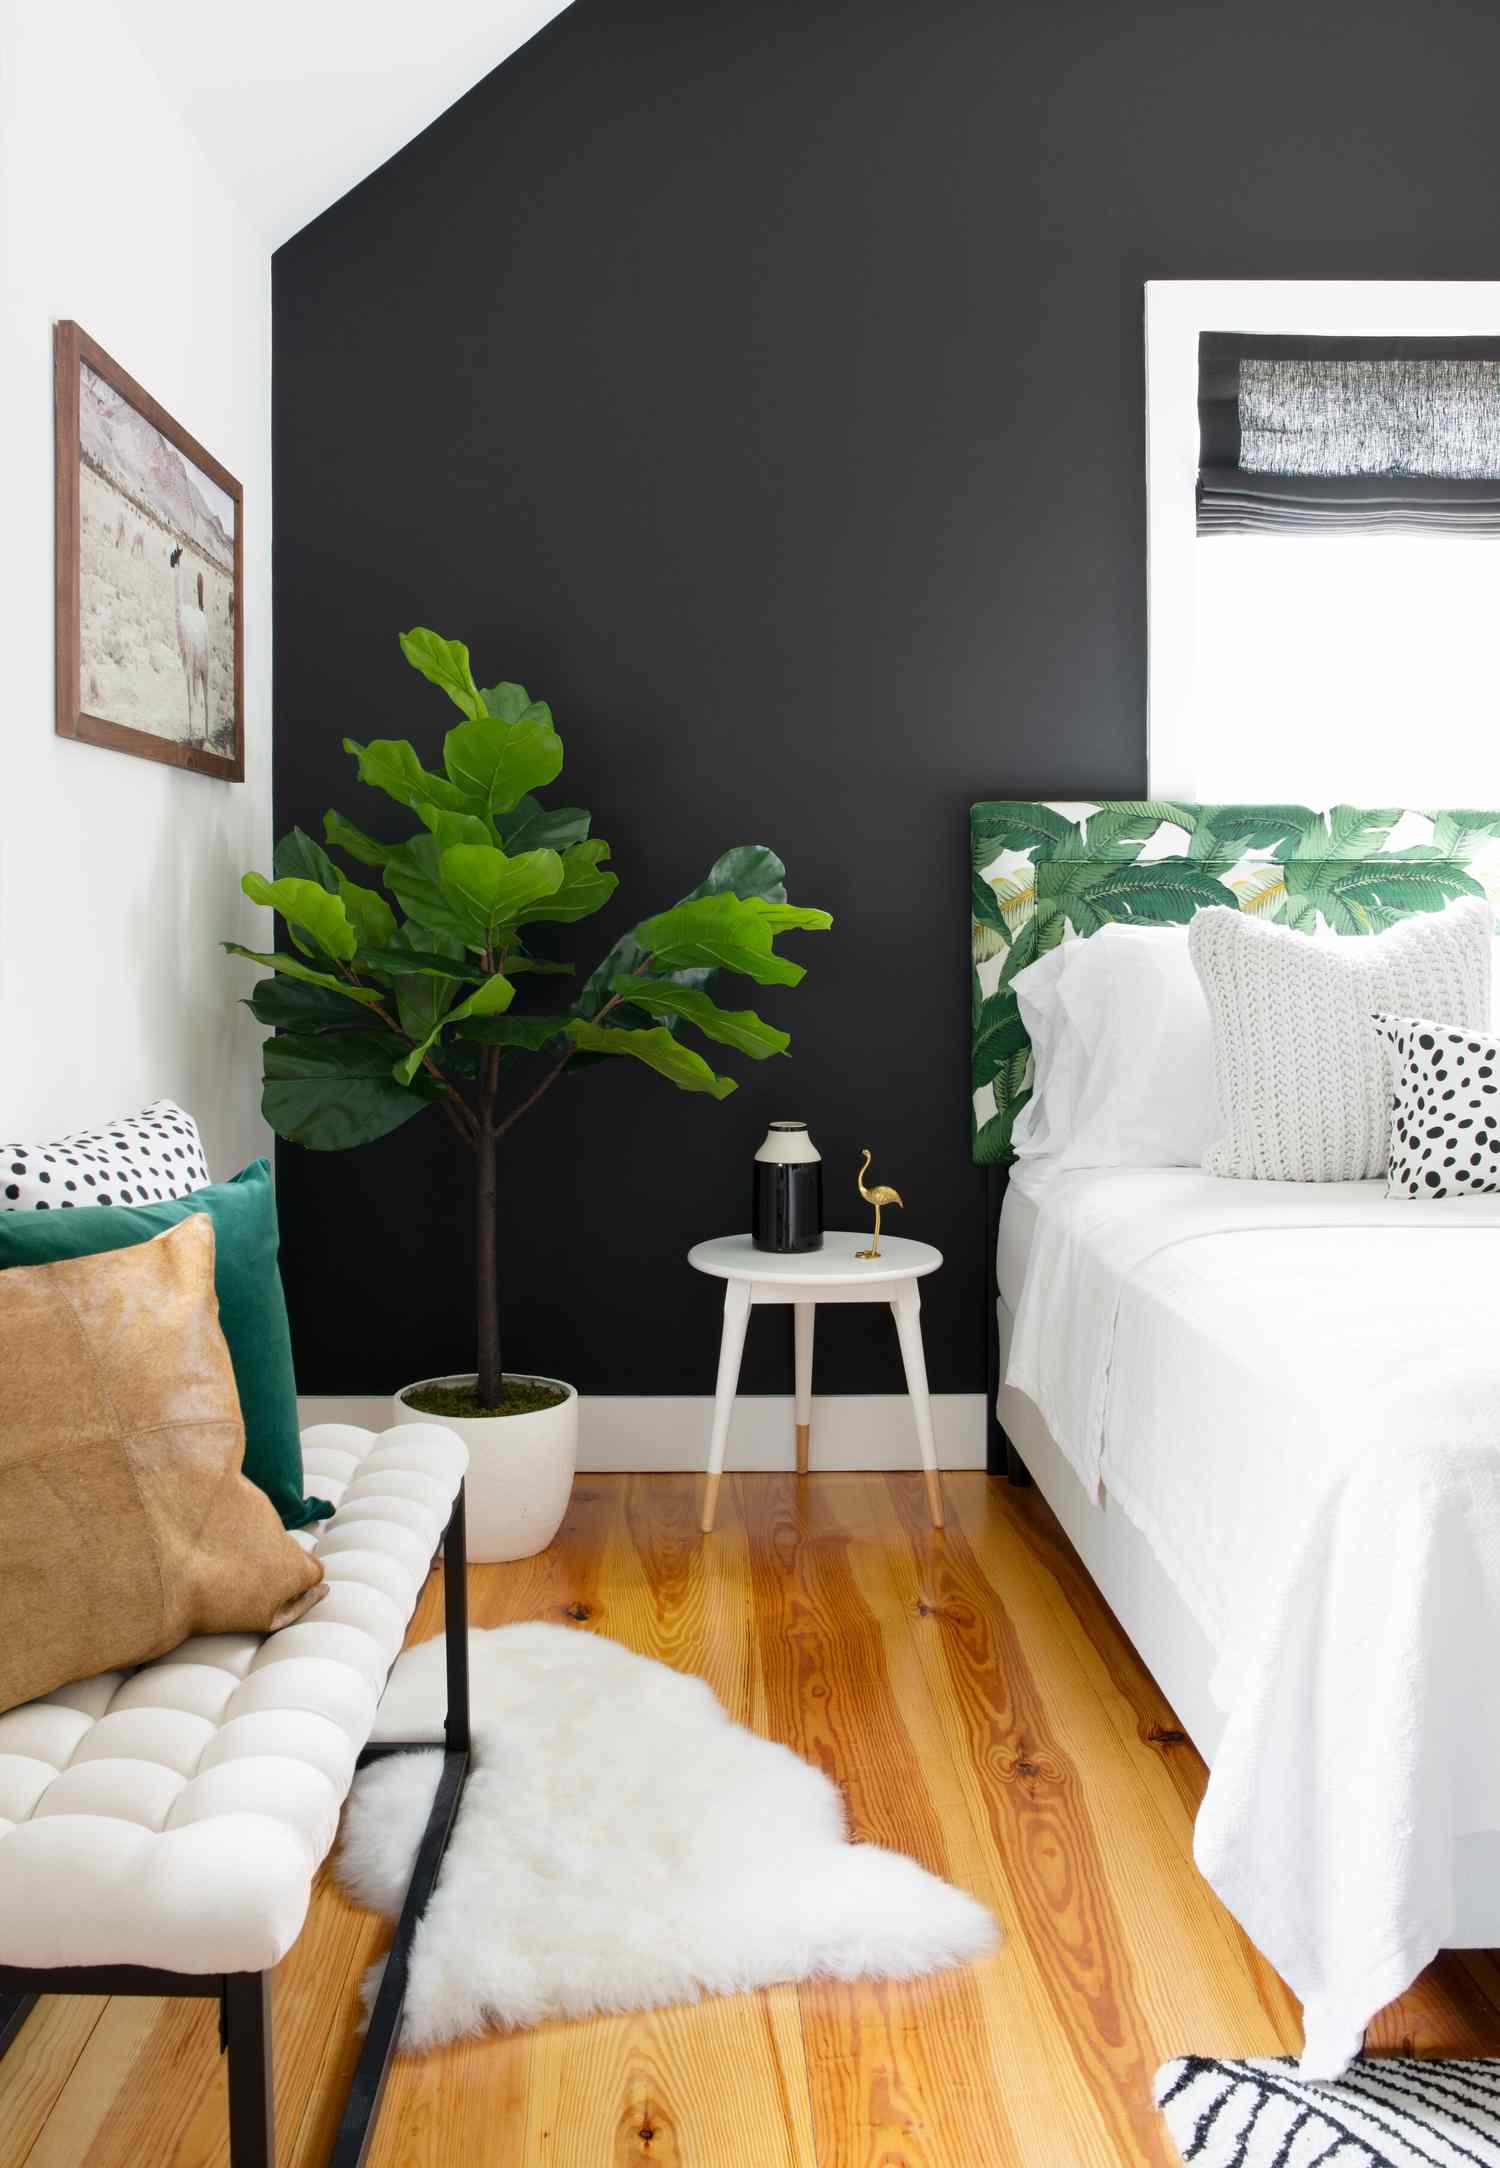 black and white bedrooms